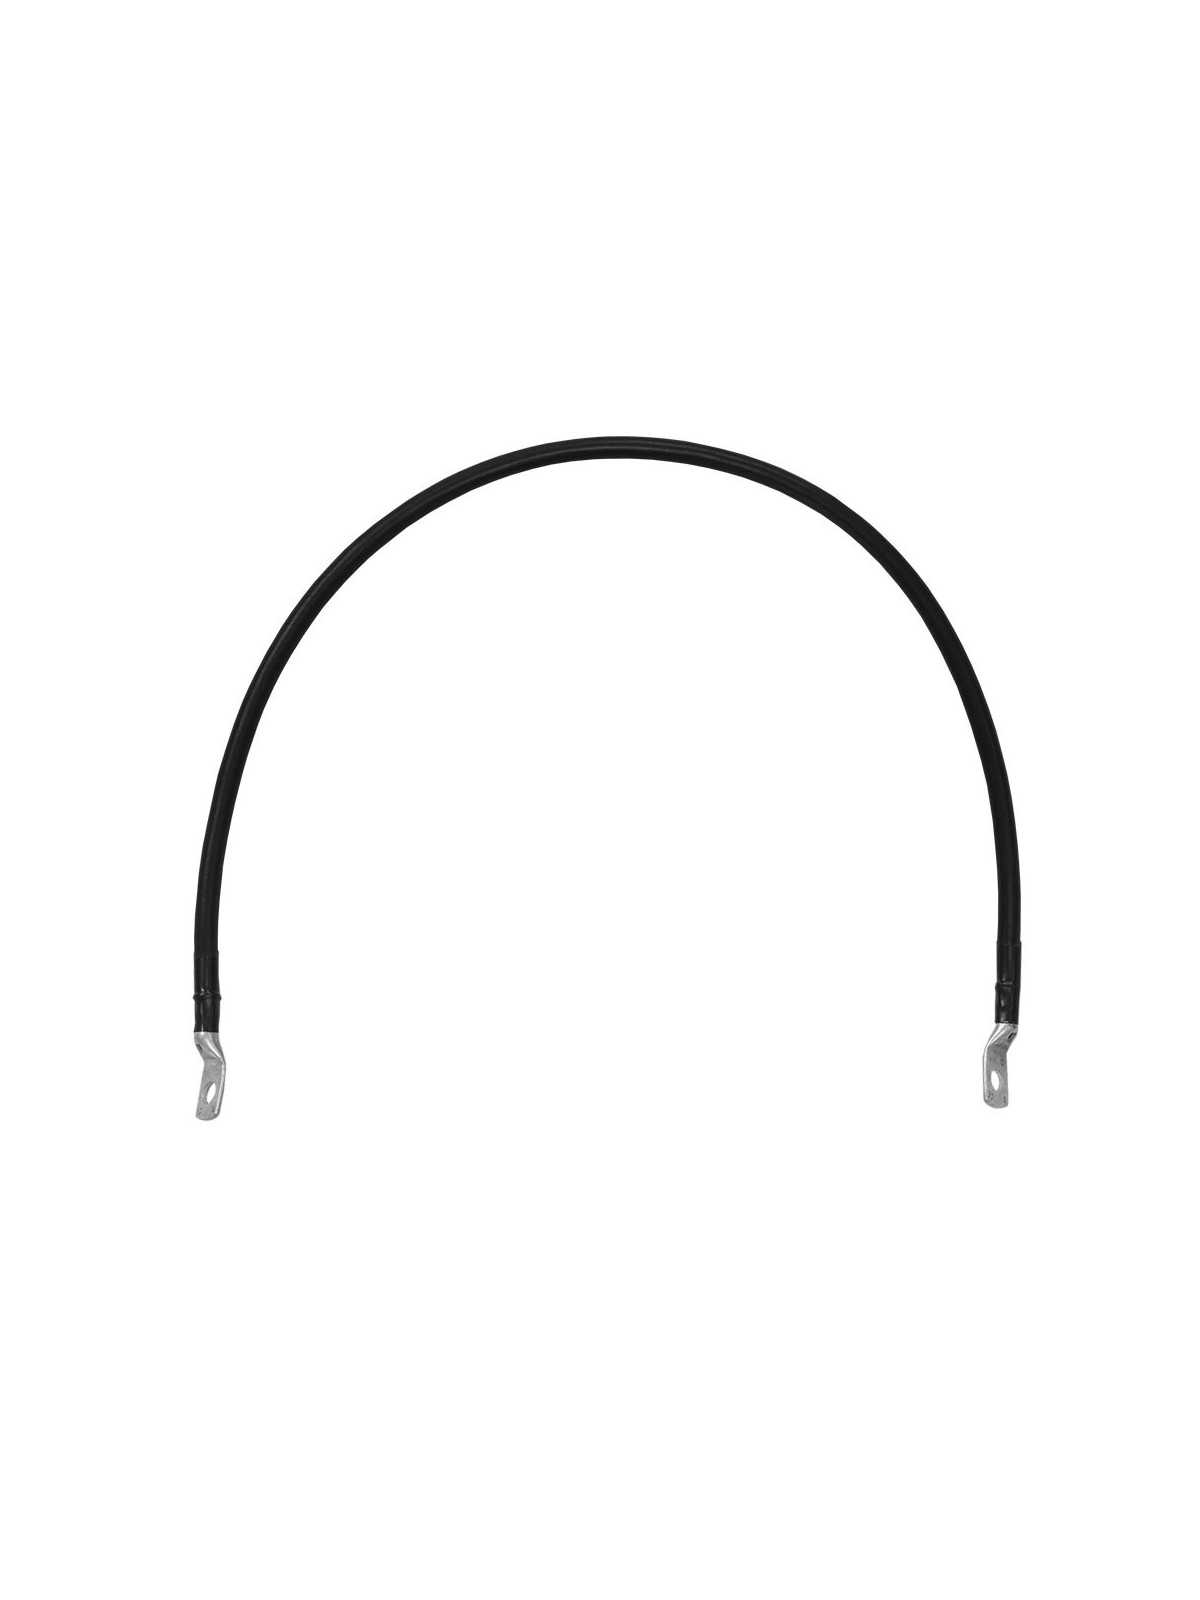 battery cable 25mm²